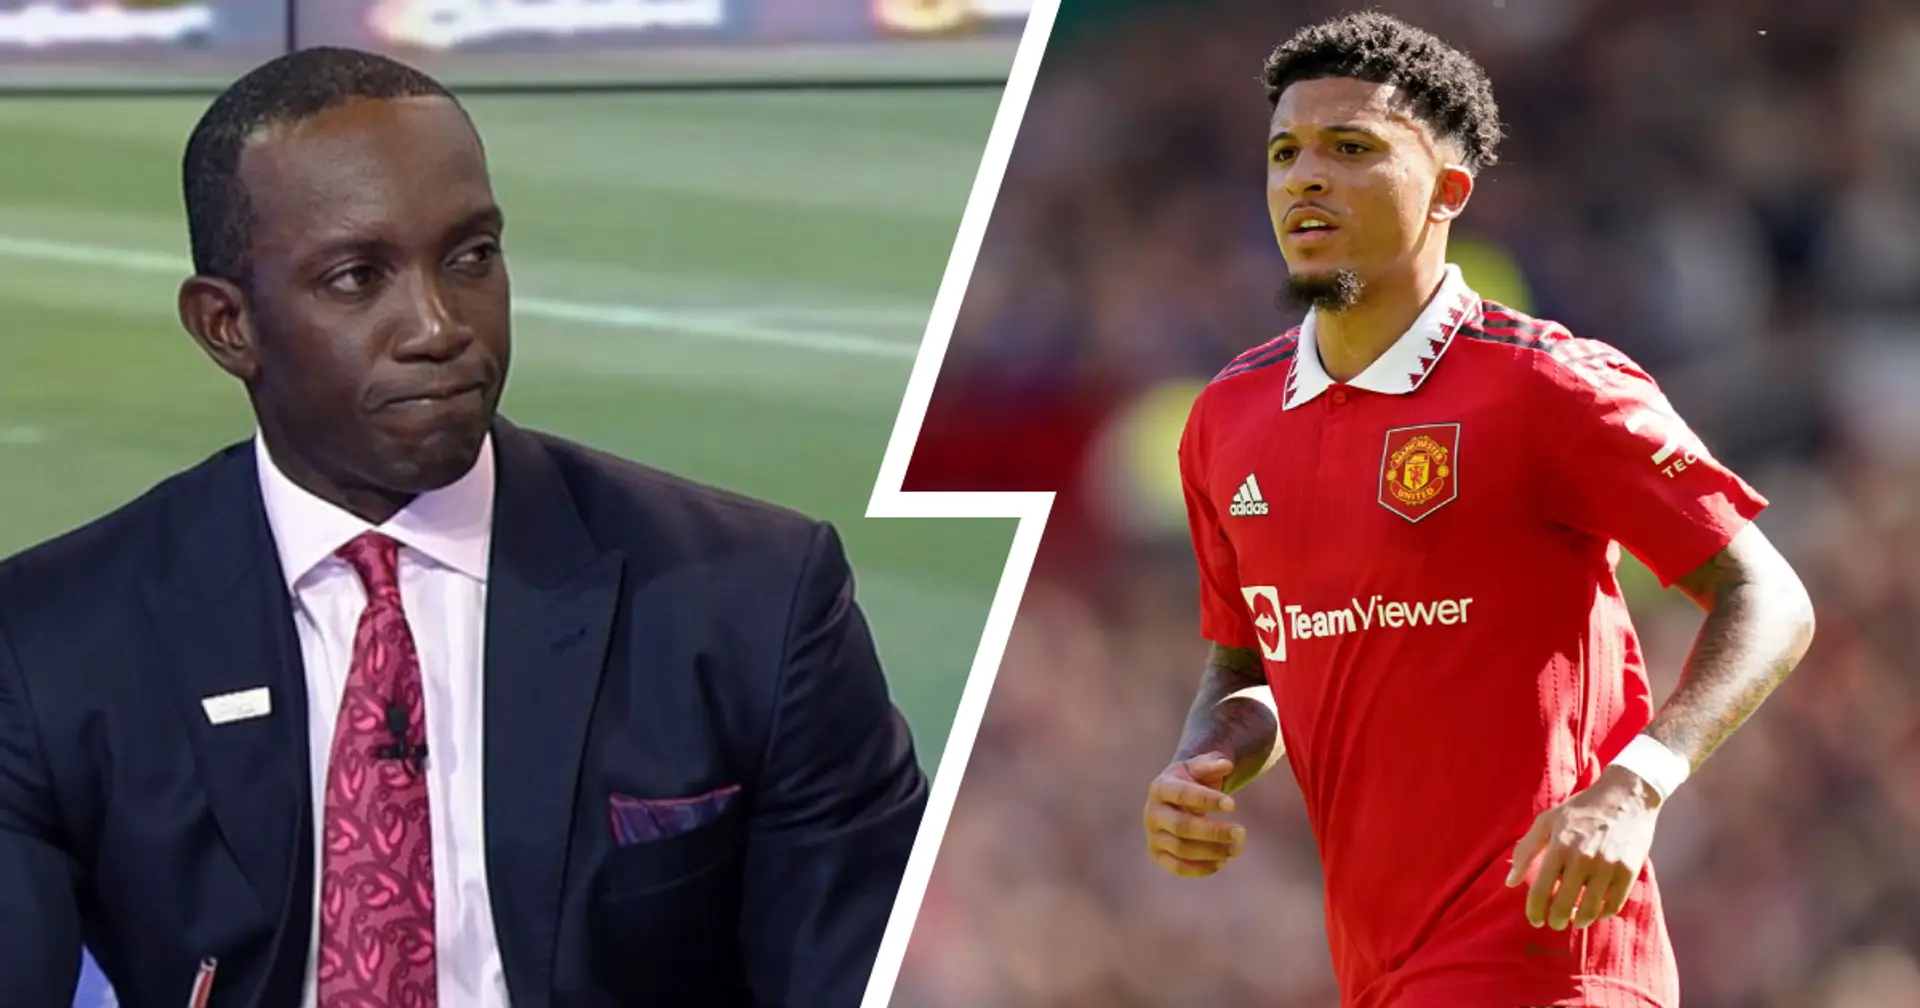 'He's on borrowed time': Dwight Yorke warns Jadon Sancho his Man United career is almost over